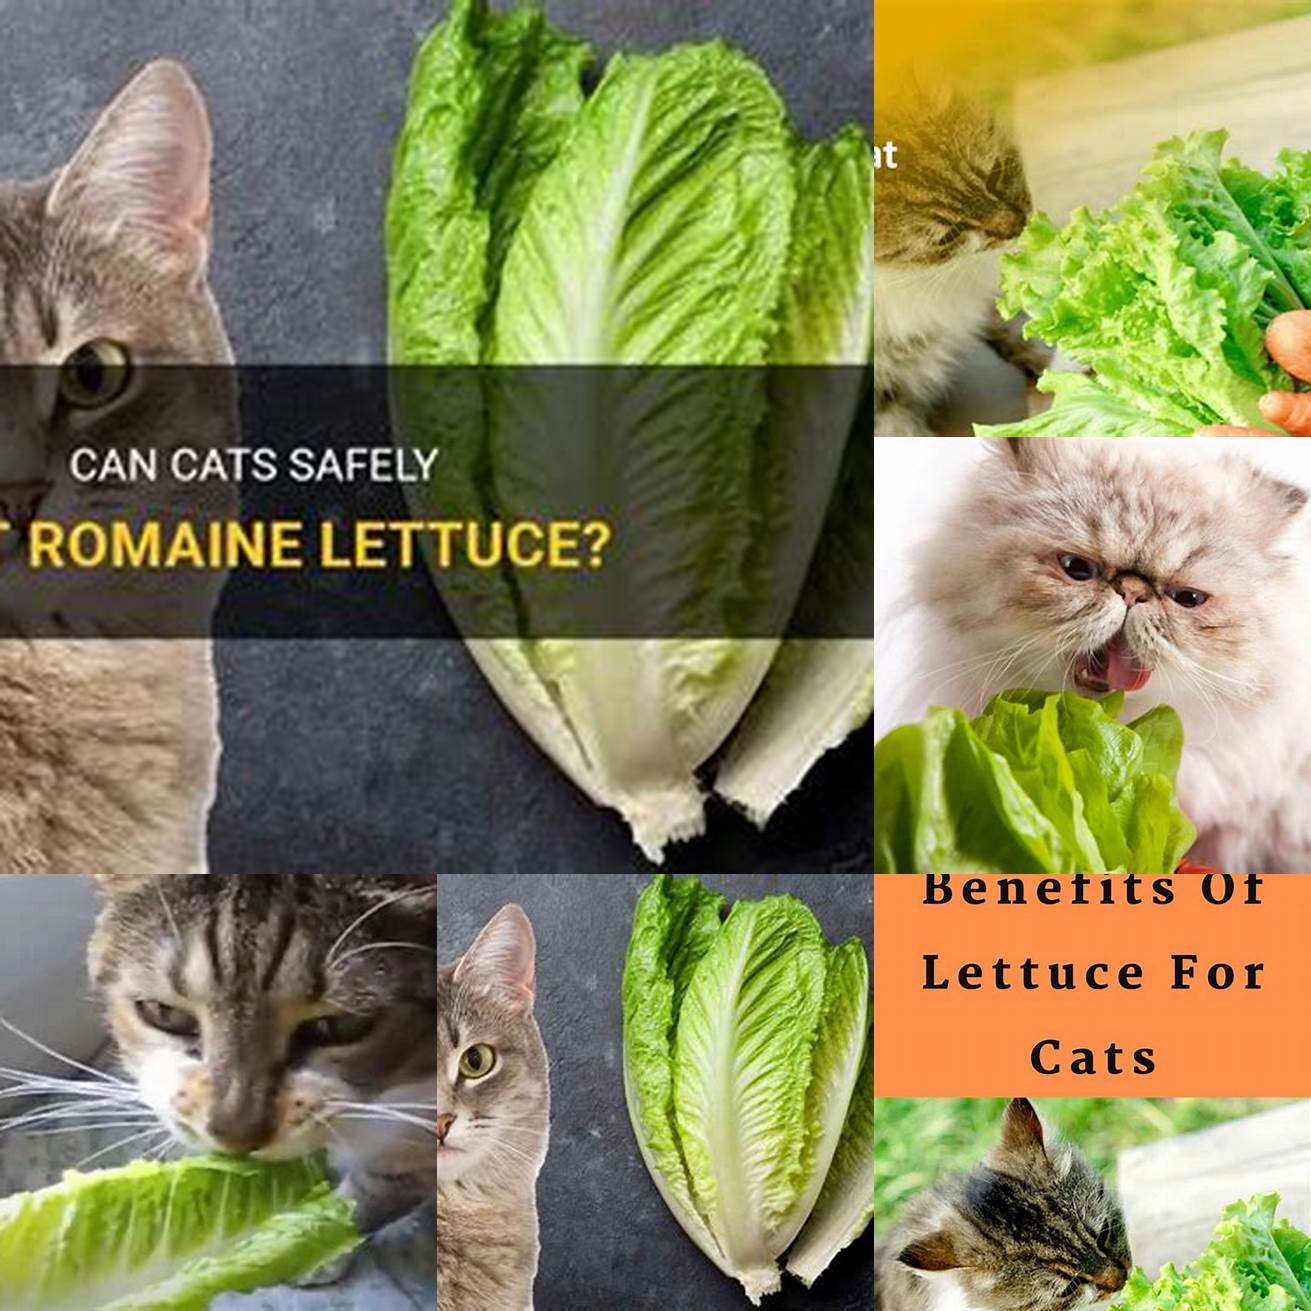 How much romaine lettuce can cats eat